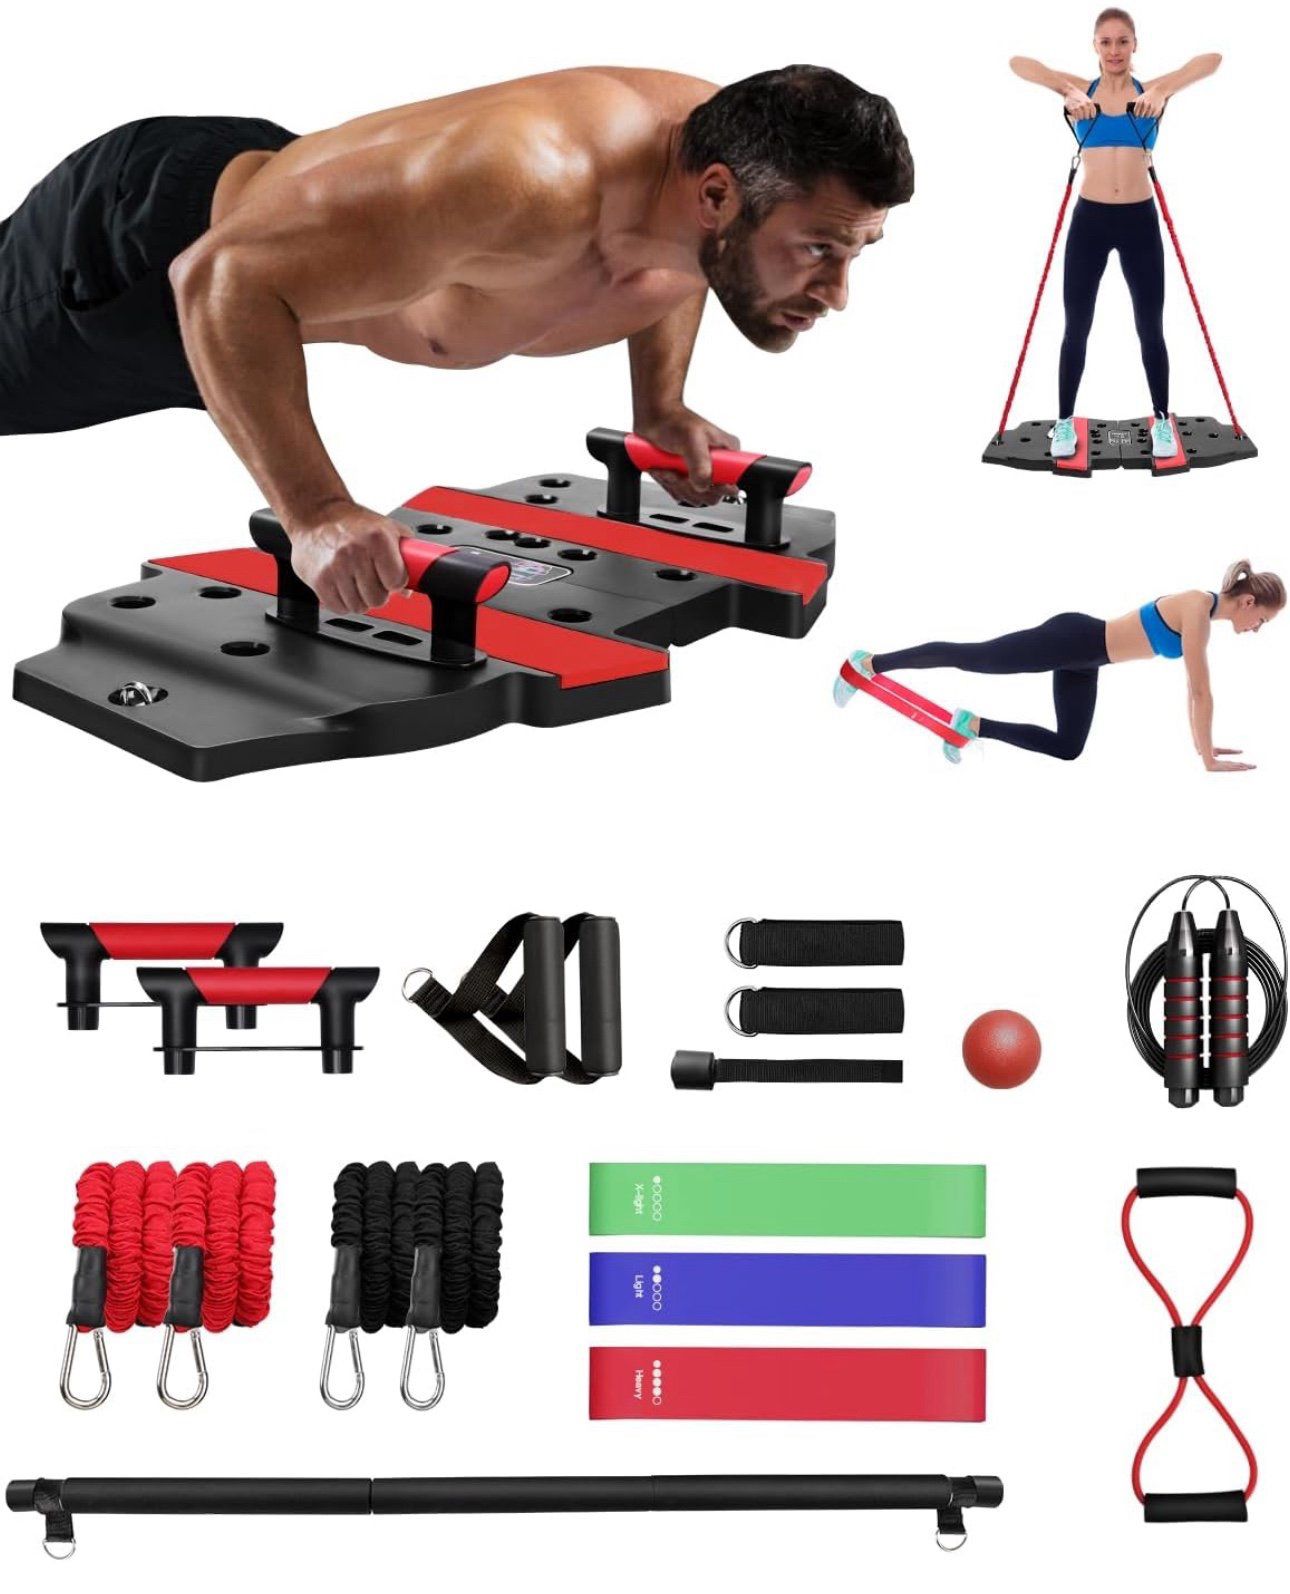 Portable Home Gym, Workout Equipment with 20 Accessories Including Fitness Board